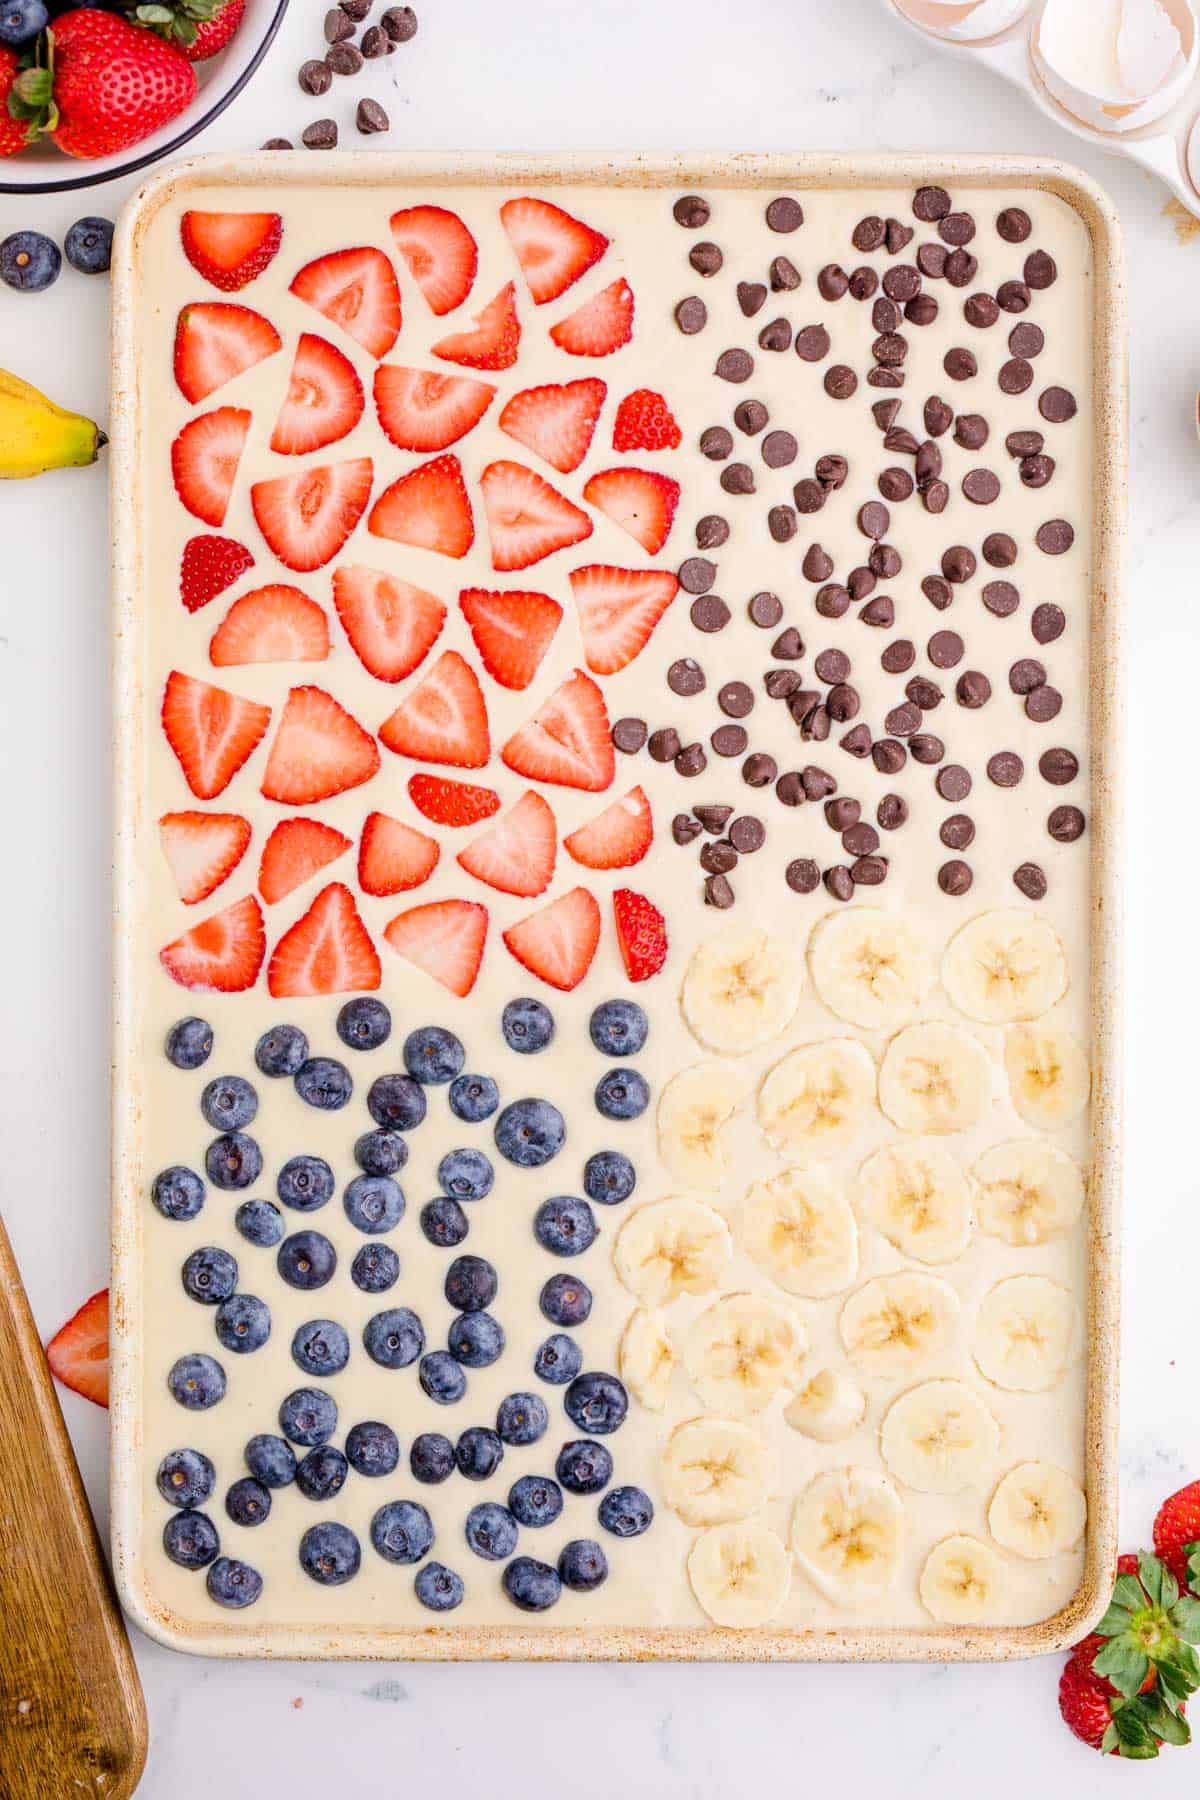 strawberry slices, chocolate chips, blueberries, and sliced bananas placed on top of pancake batter in metal sheet pan